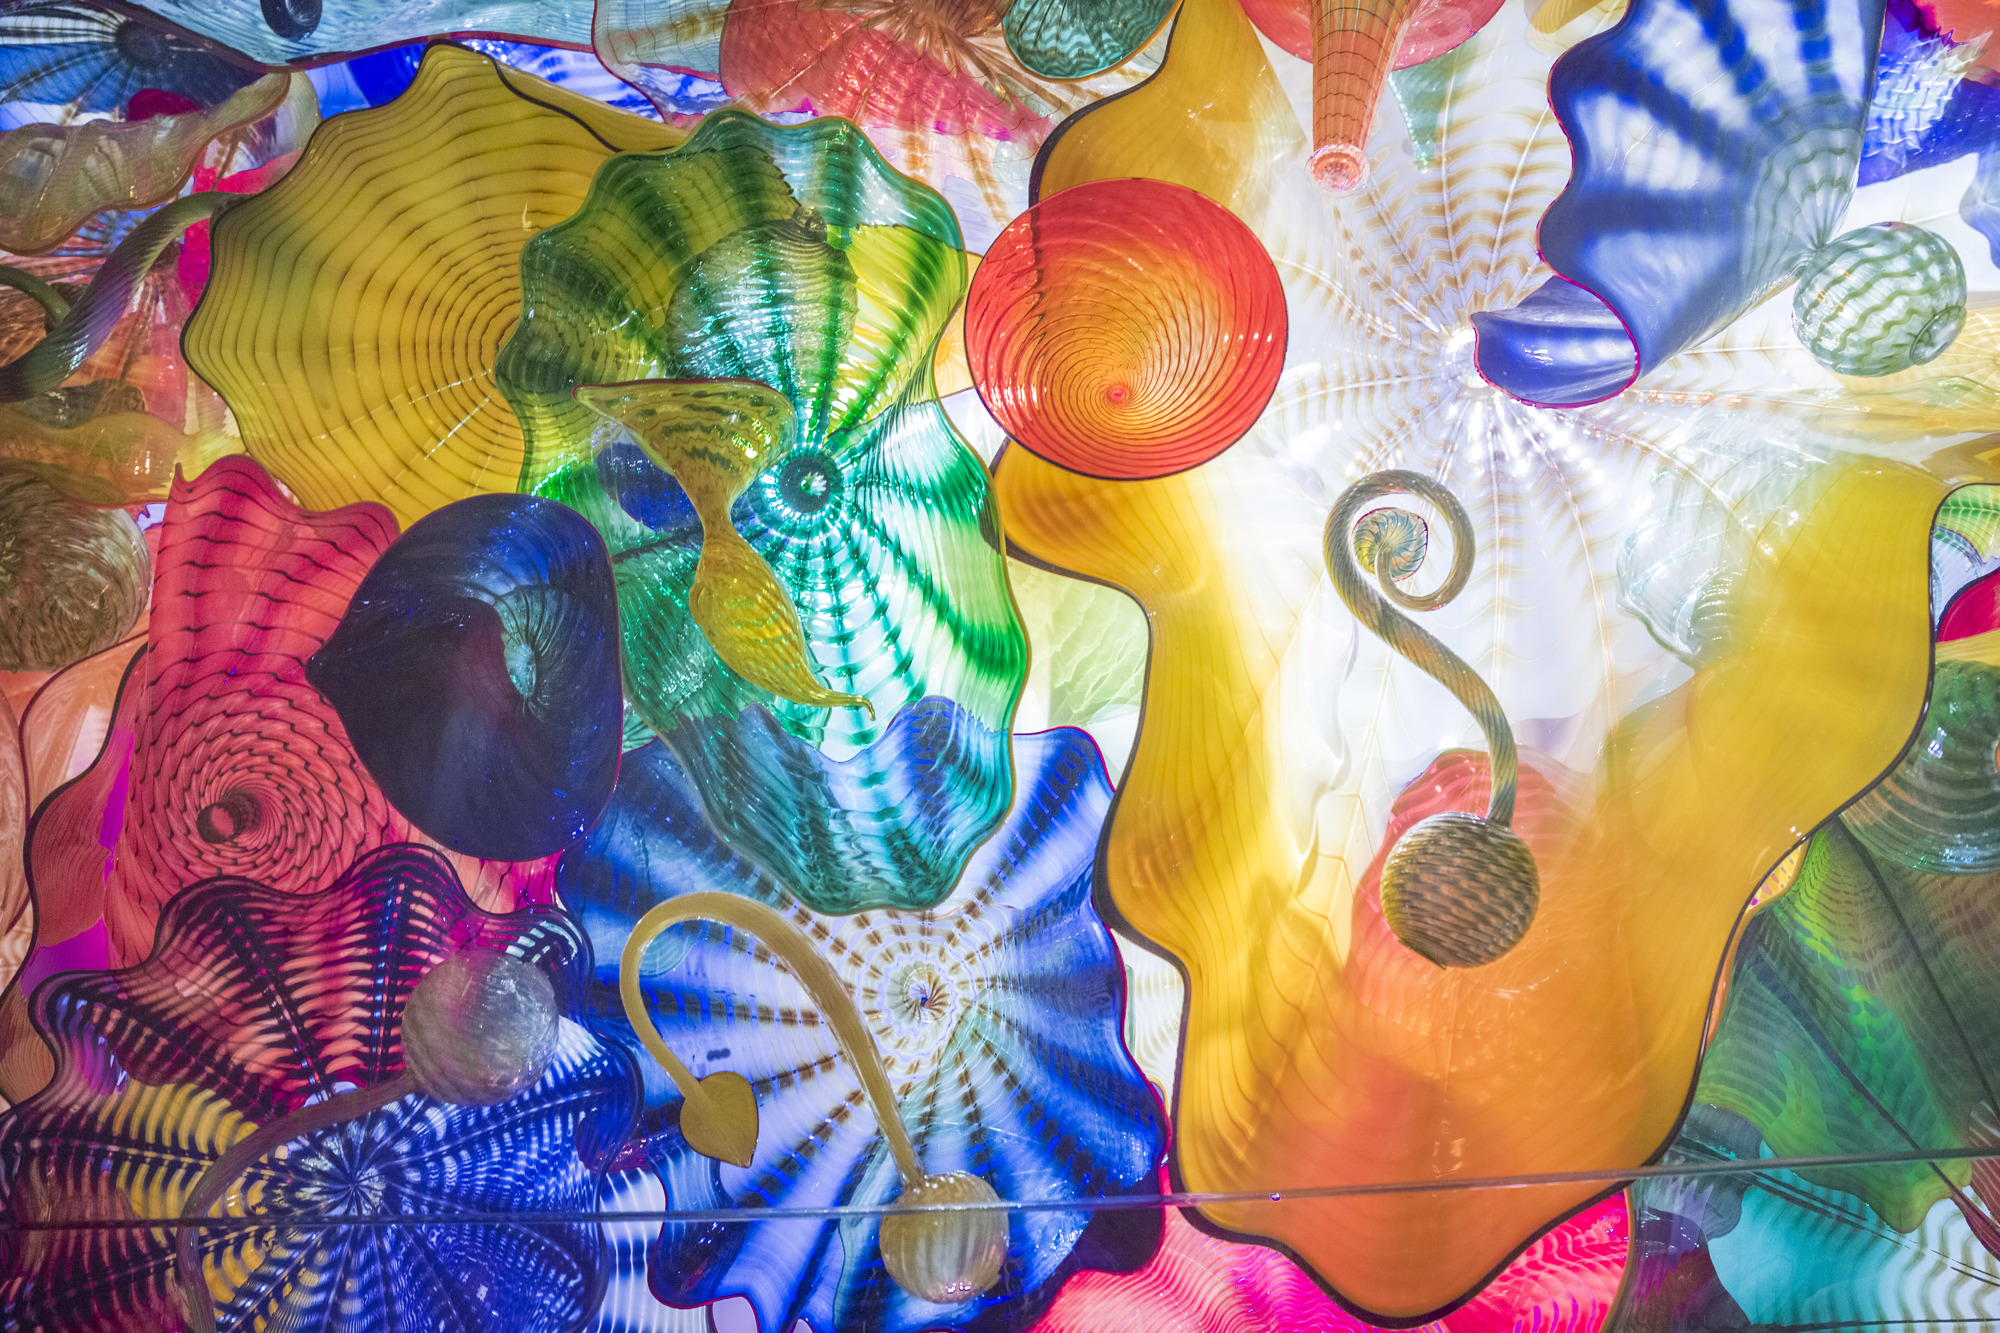 The Chihuly Collection at the Morean Arts Center is a stunning, permanent collection of world-renowned artist Dale Chihuly’s unique artwork. A 20-foot glass sculpture greets you at the entrance.  (Courtesy photo)